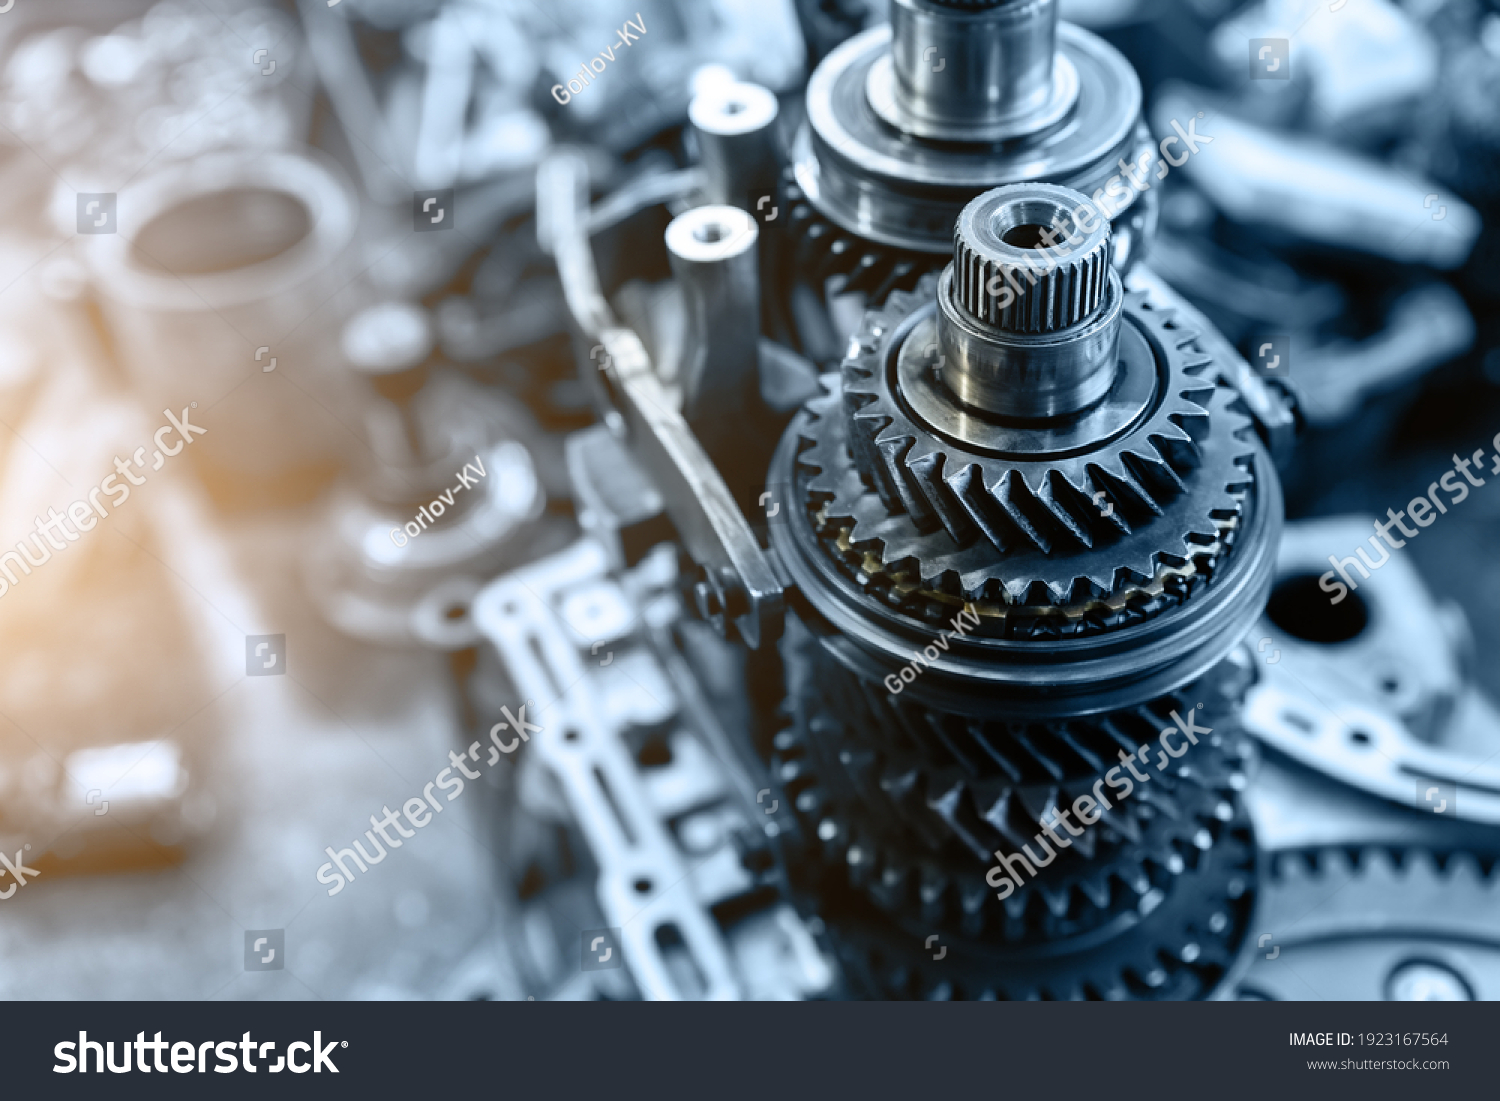 Closeup disassembled car automatic transmission gear part on workbench at garage or repair factory station for fix service or maintenance. Vehicle part detail. Complex industrial mechanism background #1923167564